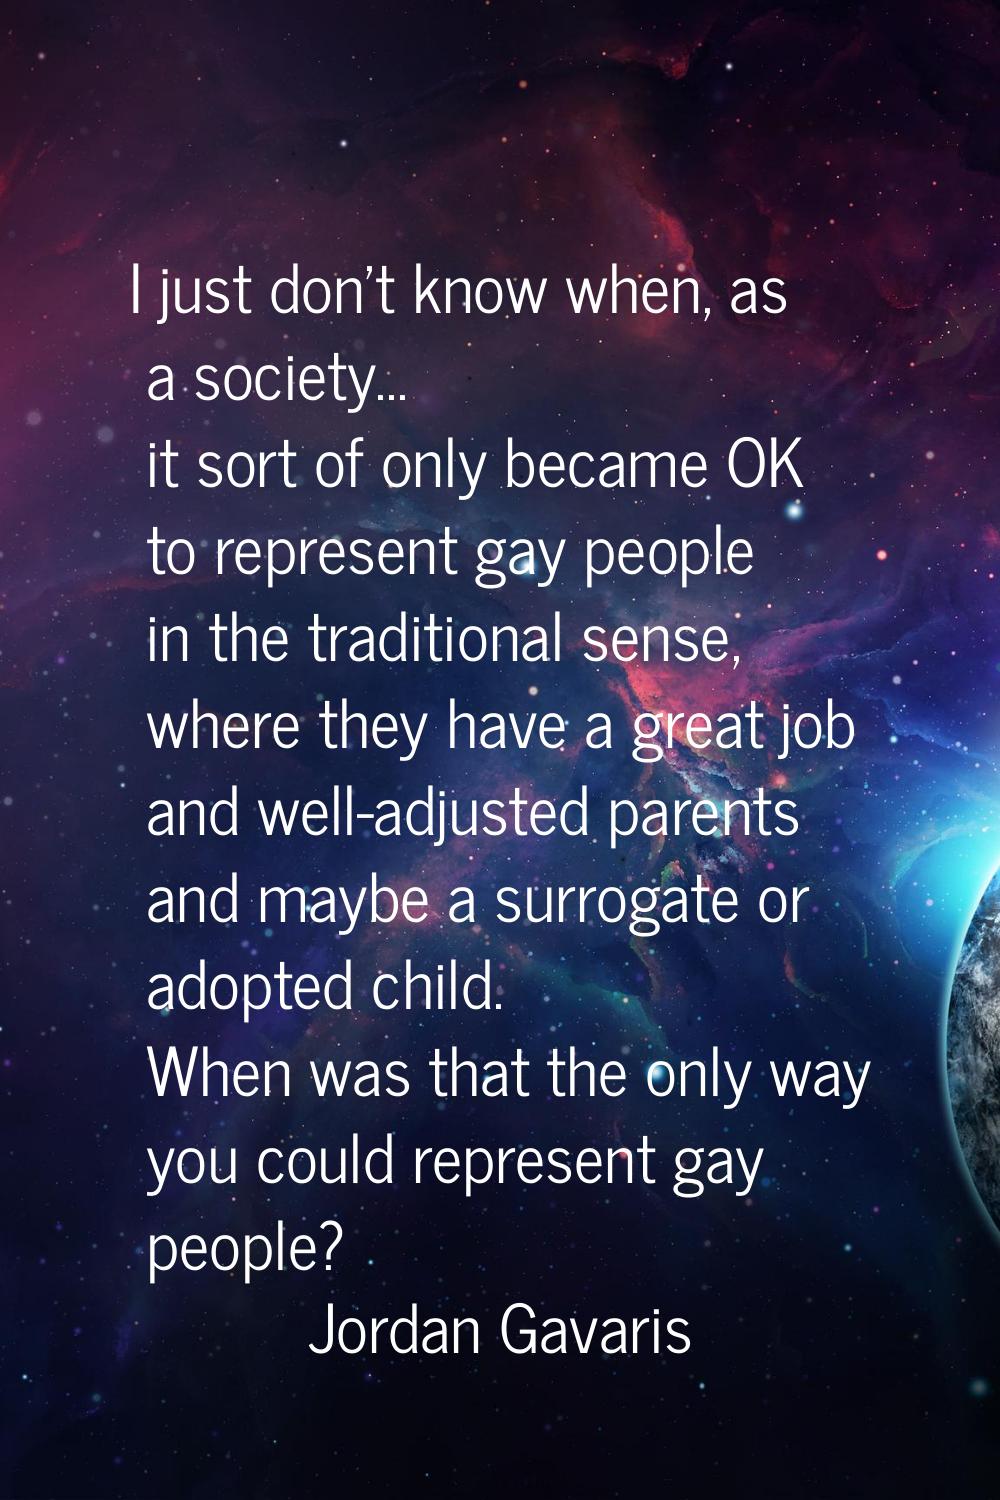 I just don't know when, as a society... it sort of only became OK to represent gay people in the tr